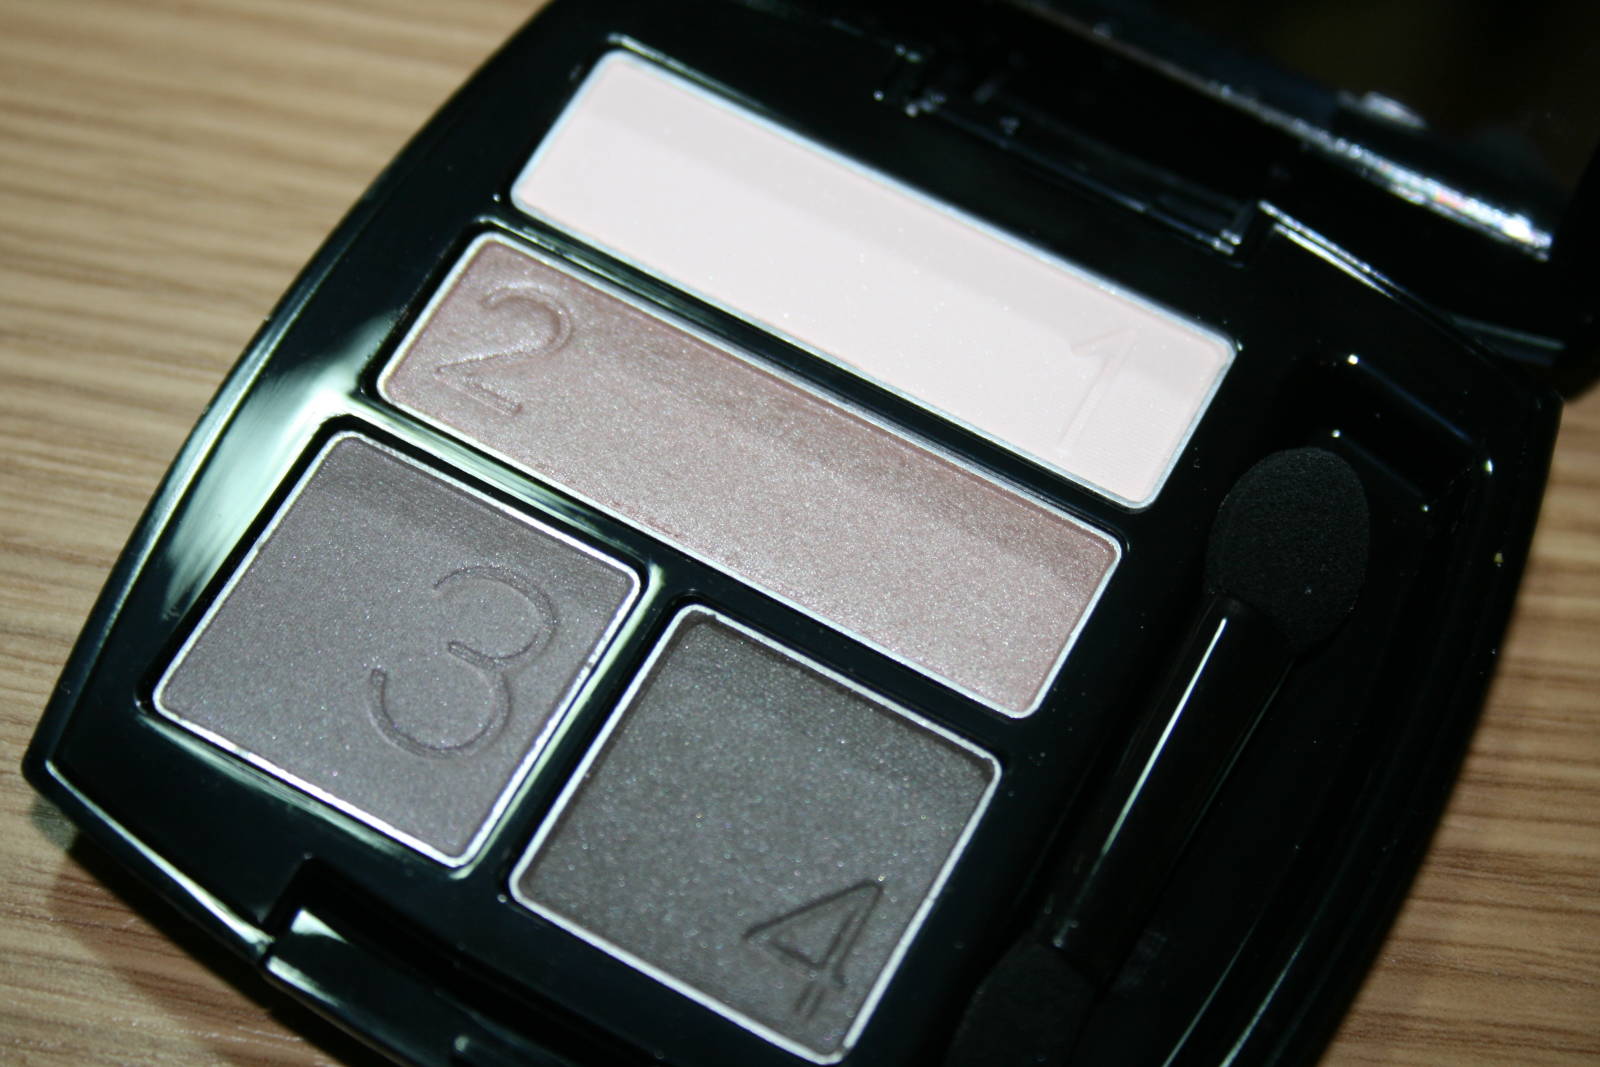 Quick Pick Tuesday: Avon True Colour Eyeshadow Quad in Stone Taupes